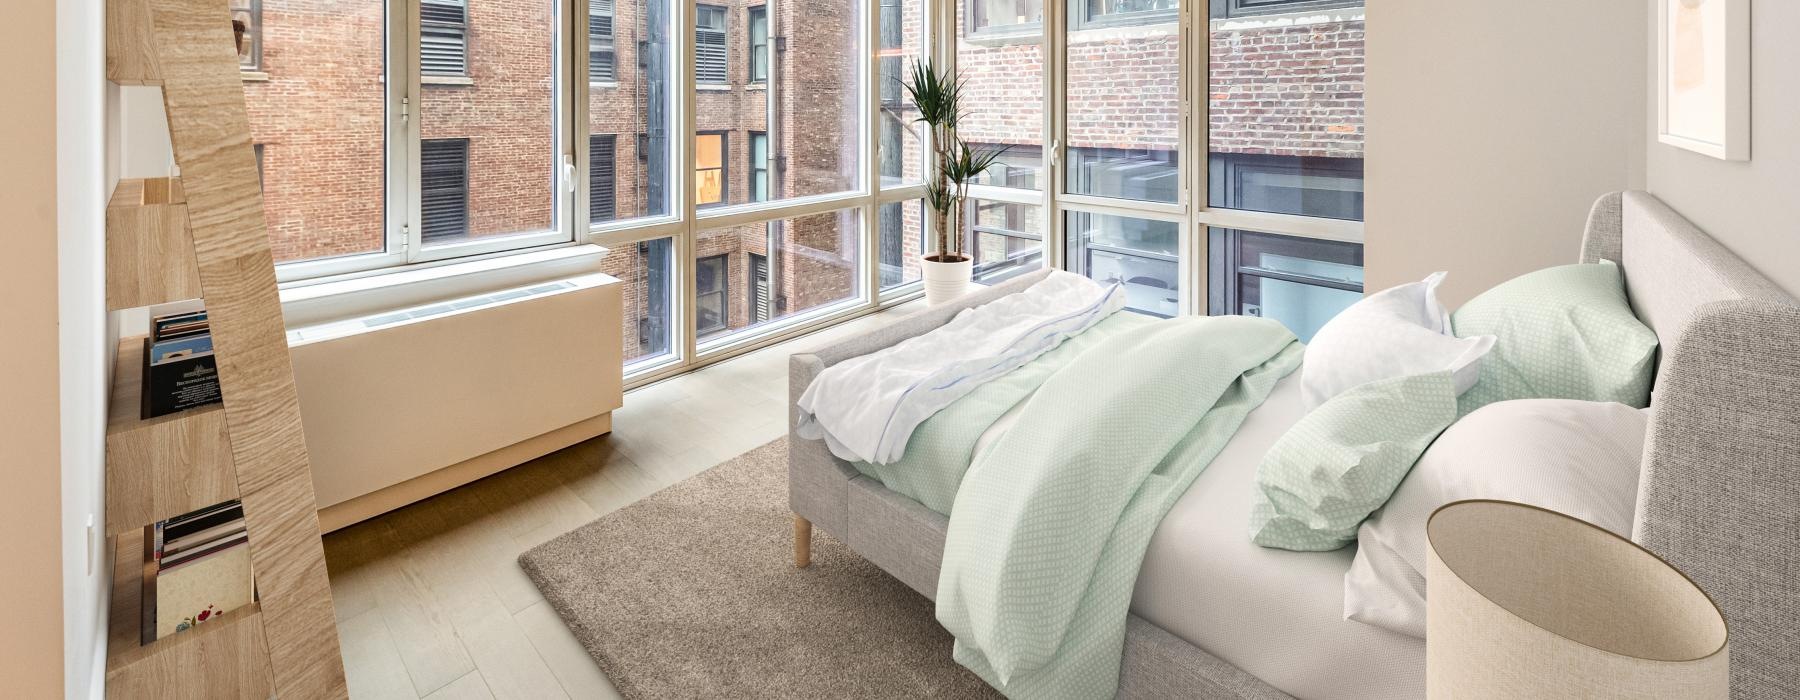 bedroom surrounded by windows with city views